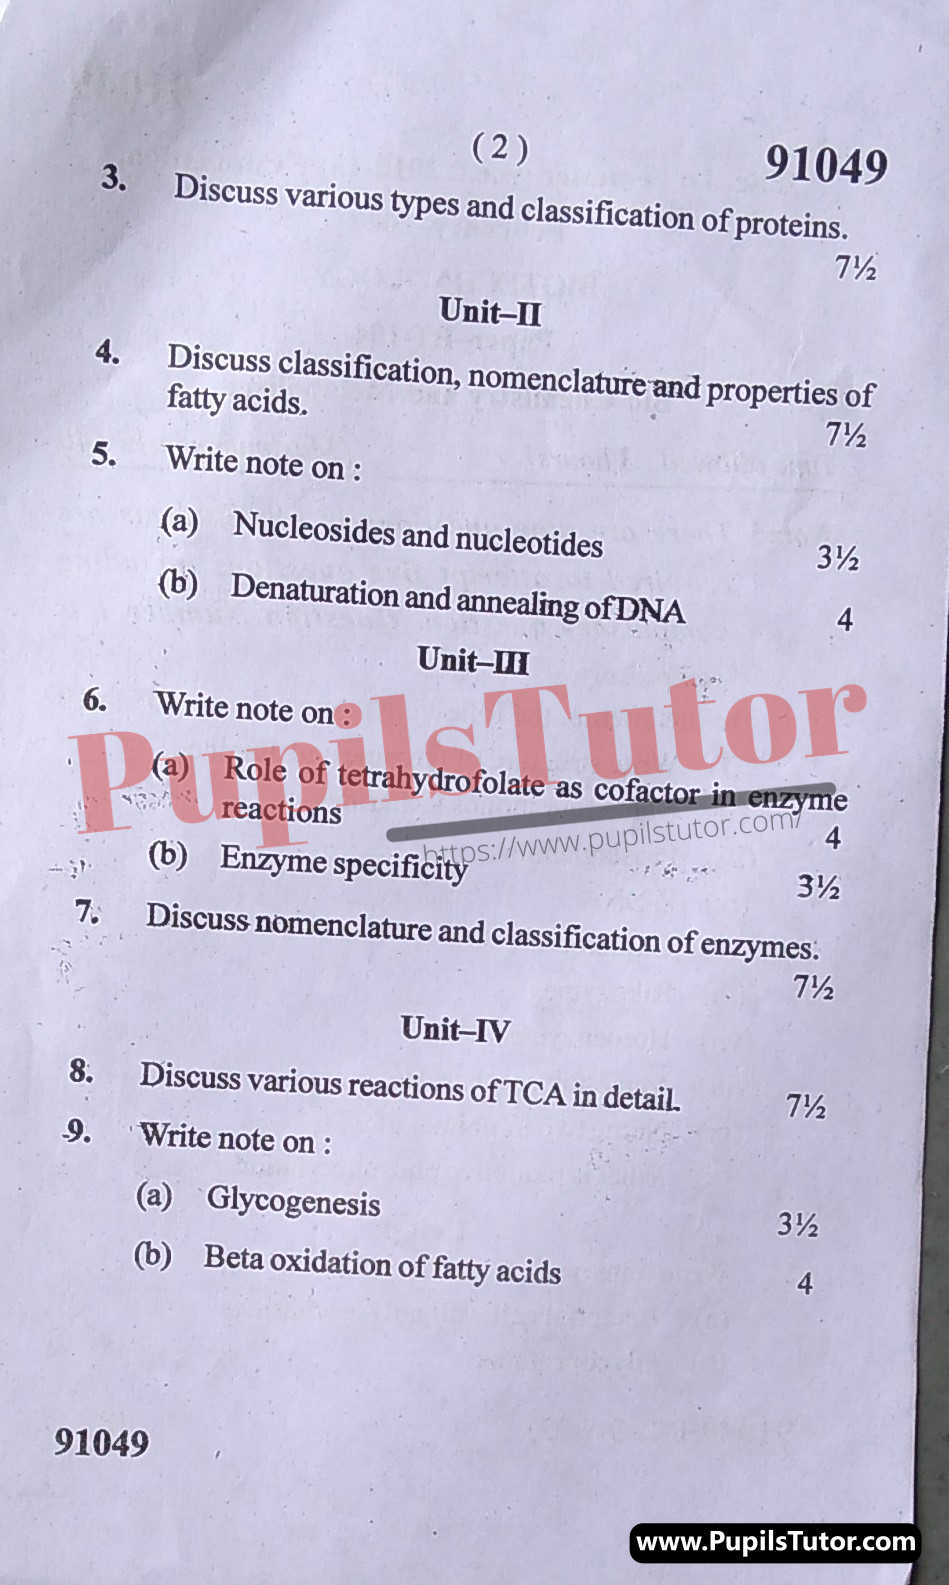 M.D. University B.Sc. [BioTechnology] Bio-Chemistry And Metabolism First Semester Important Question Answer And Solution - www.pupilstutor.com (Paper Page Number 2)